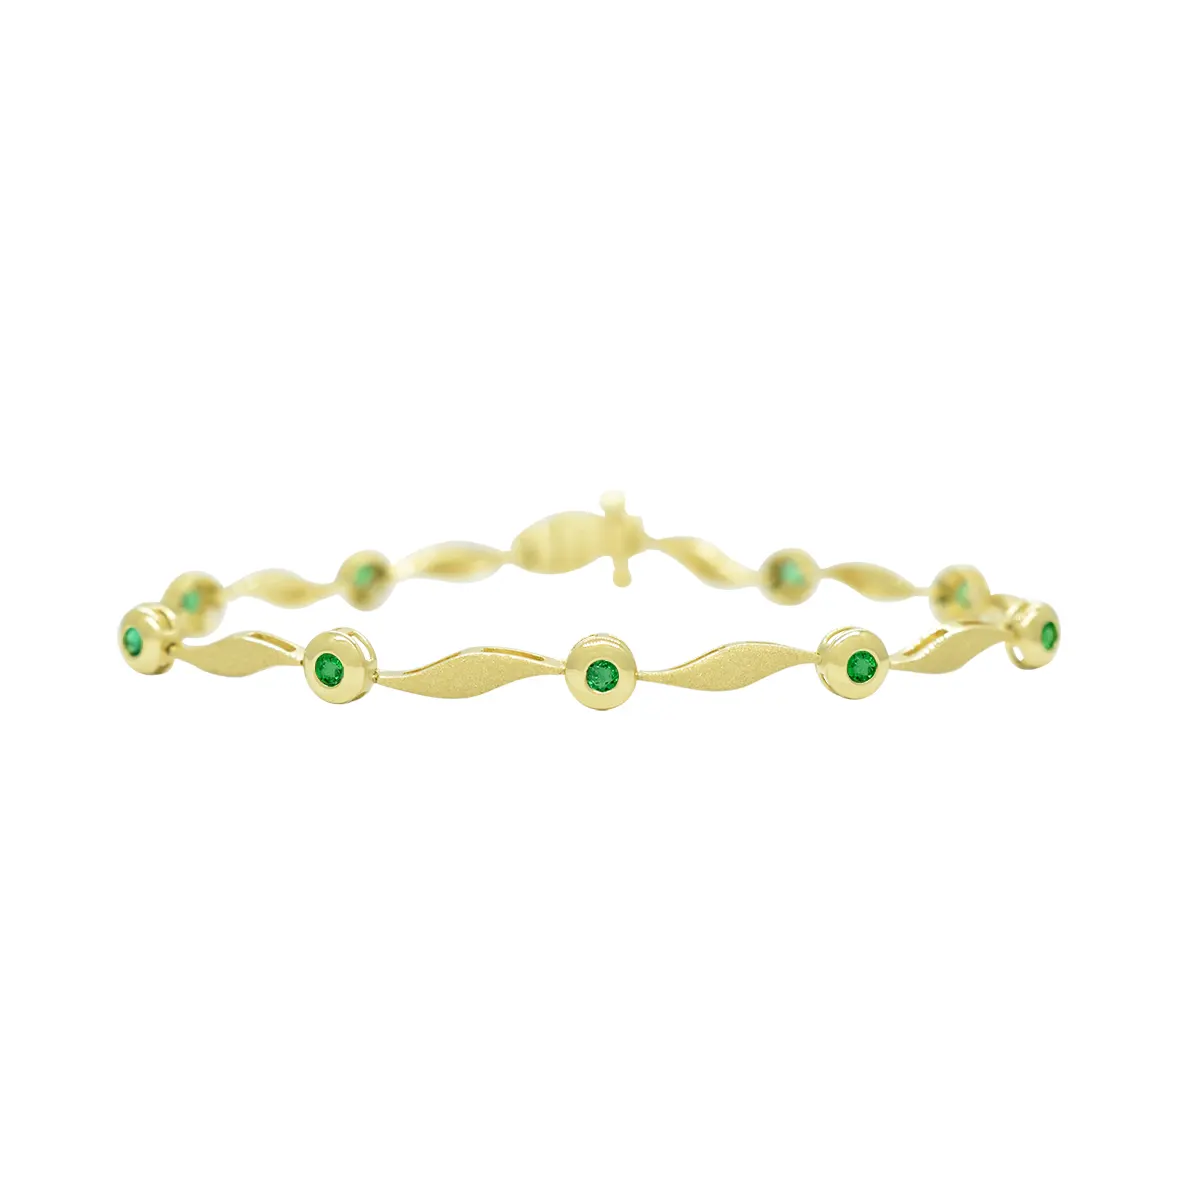 Dainty Emerald Bracelet in 18K Yellow Gold With Round Emeralds in Bezel Setting